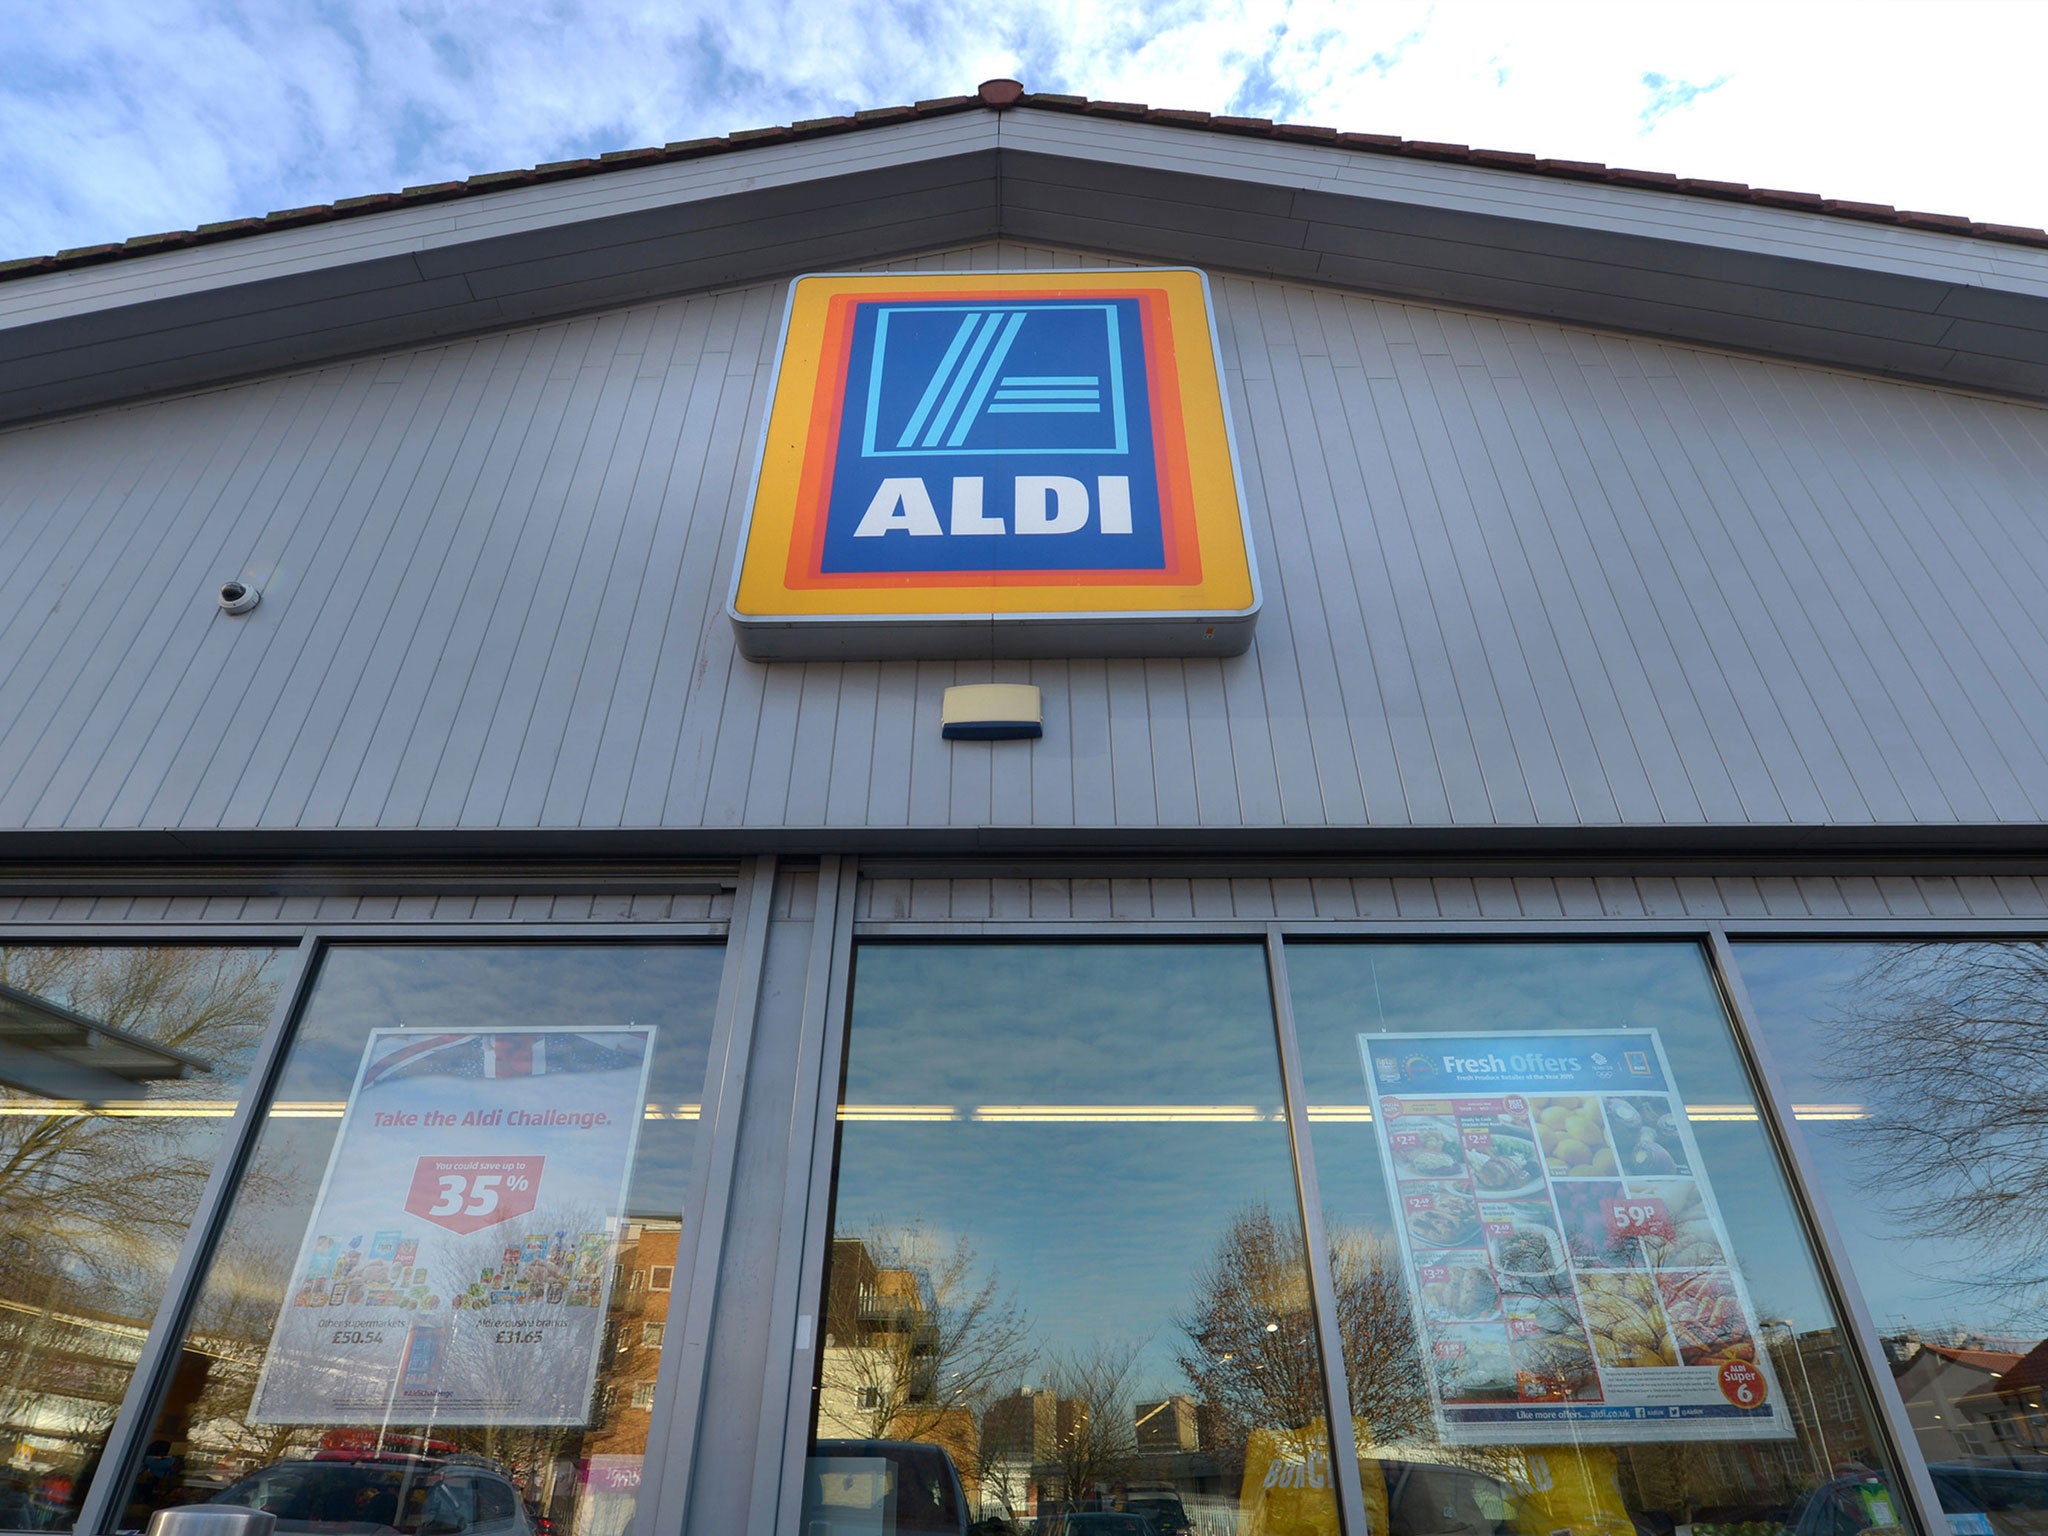 The ban will apply to all of Aldi's stores in the UK and Ireland